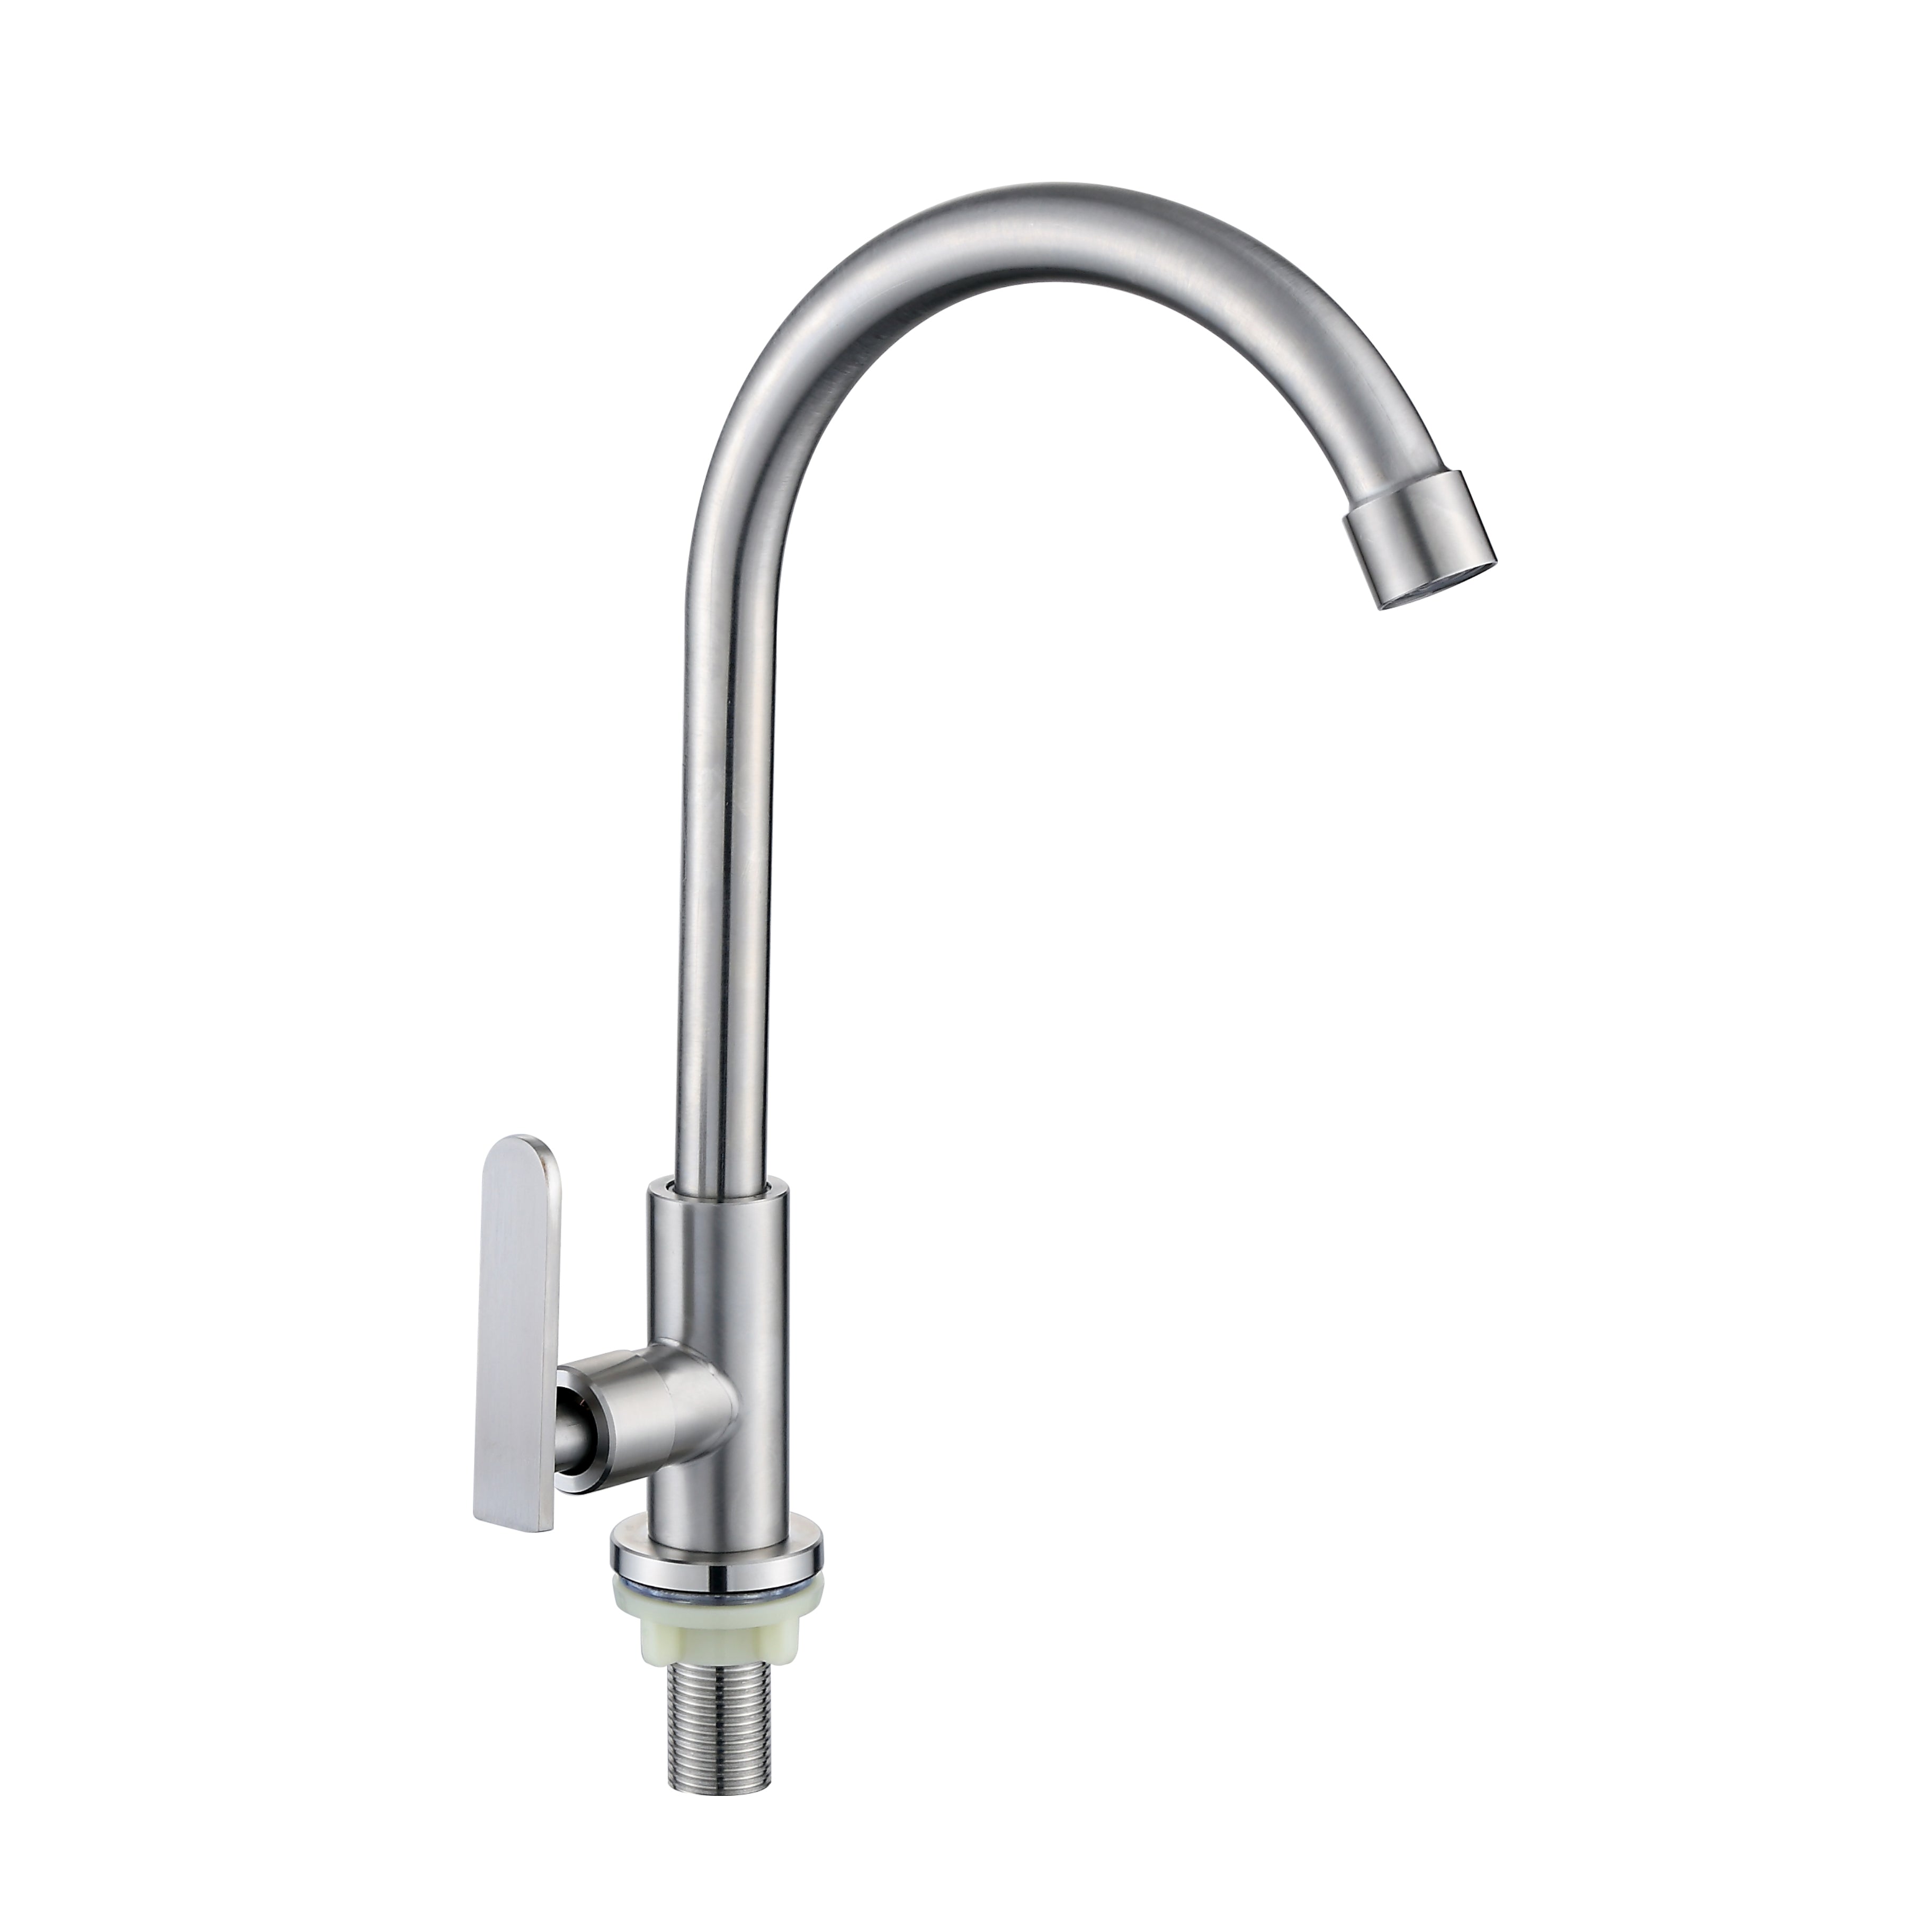 YARRA KITCHEN FAUCET DECK MOUNT STAINLESS STEEL